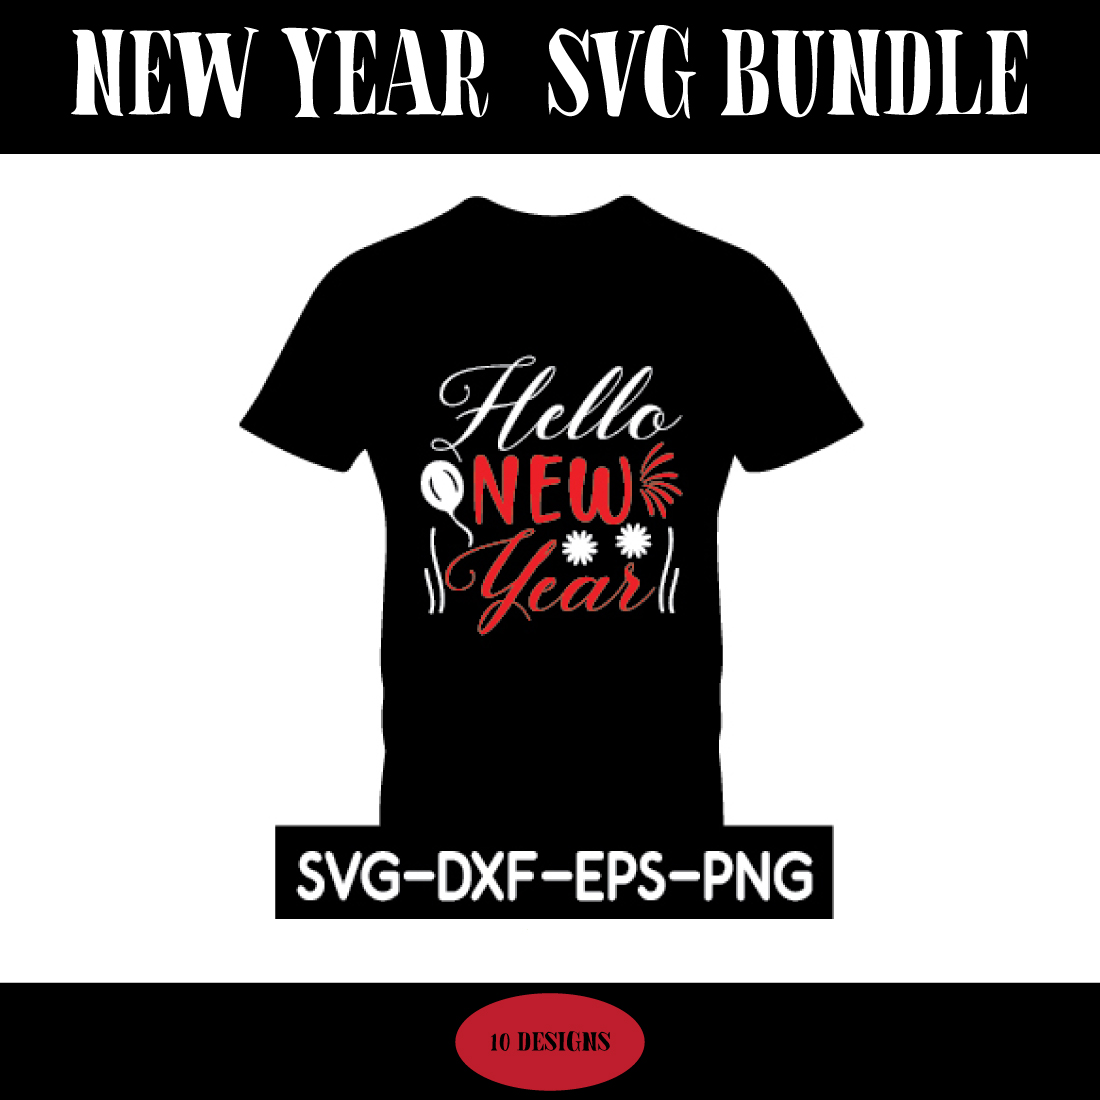 new year svg bundle cover image.